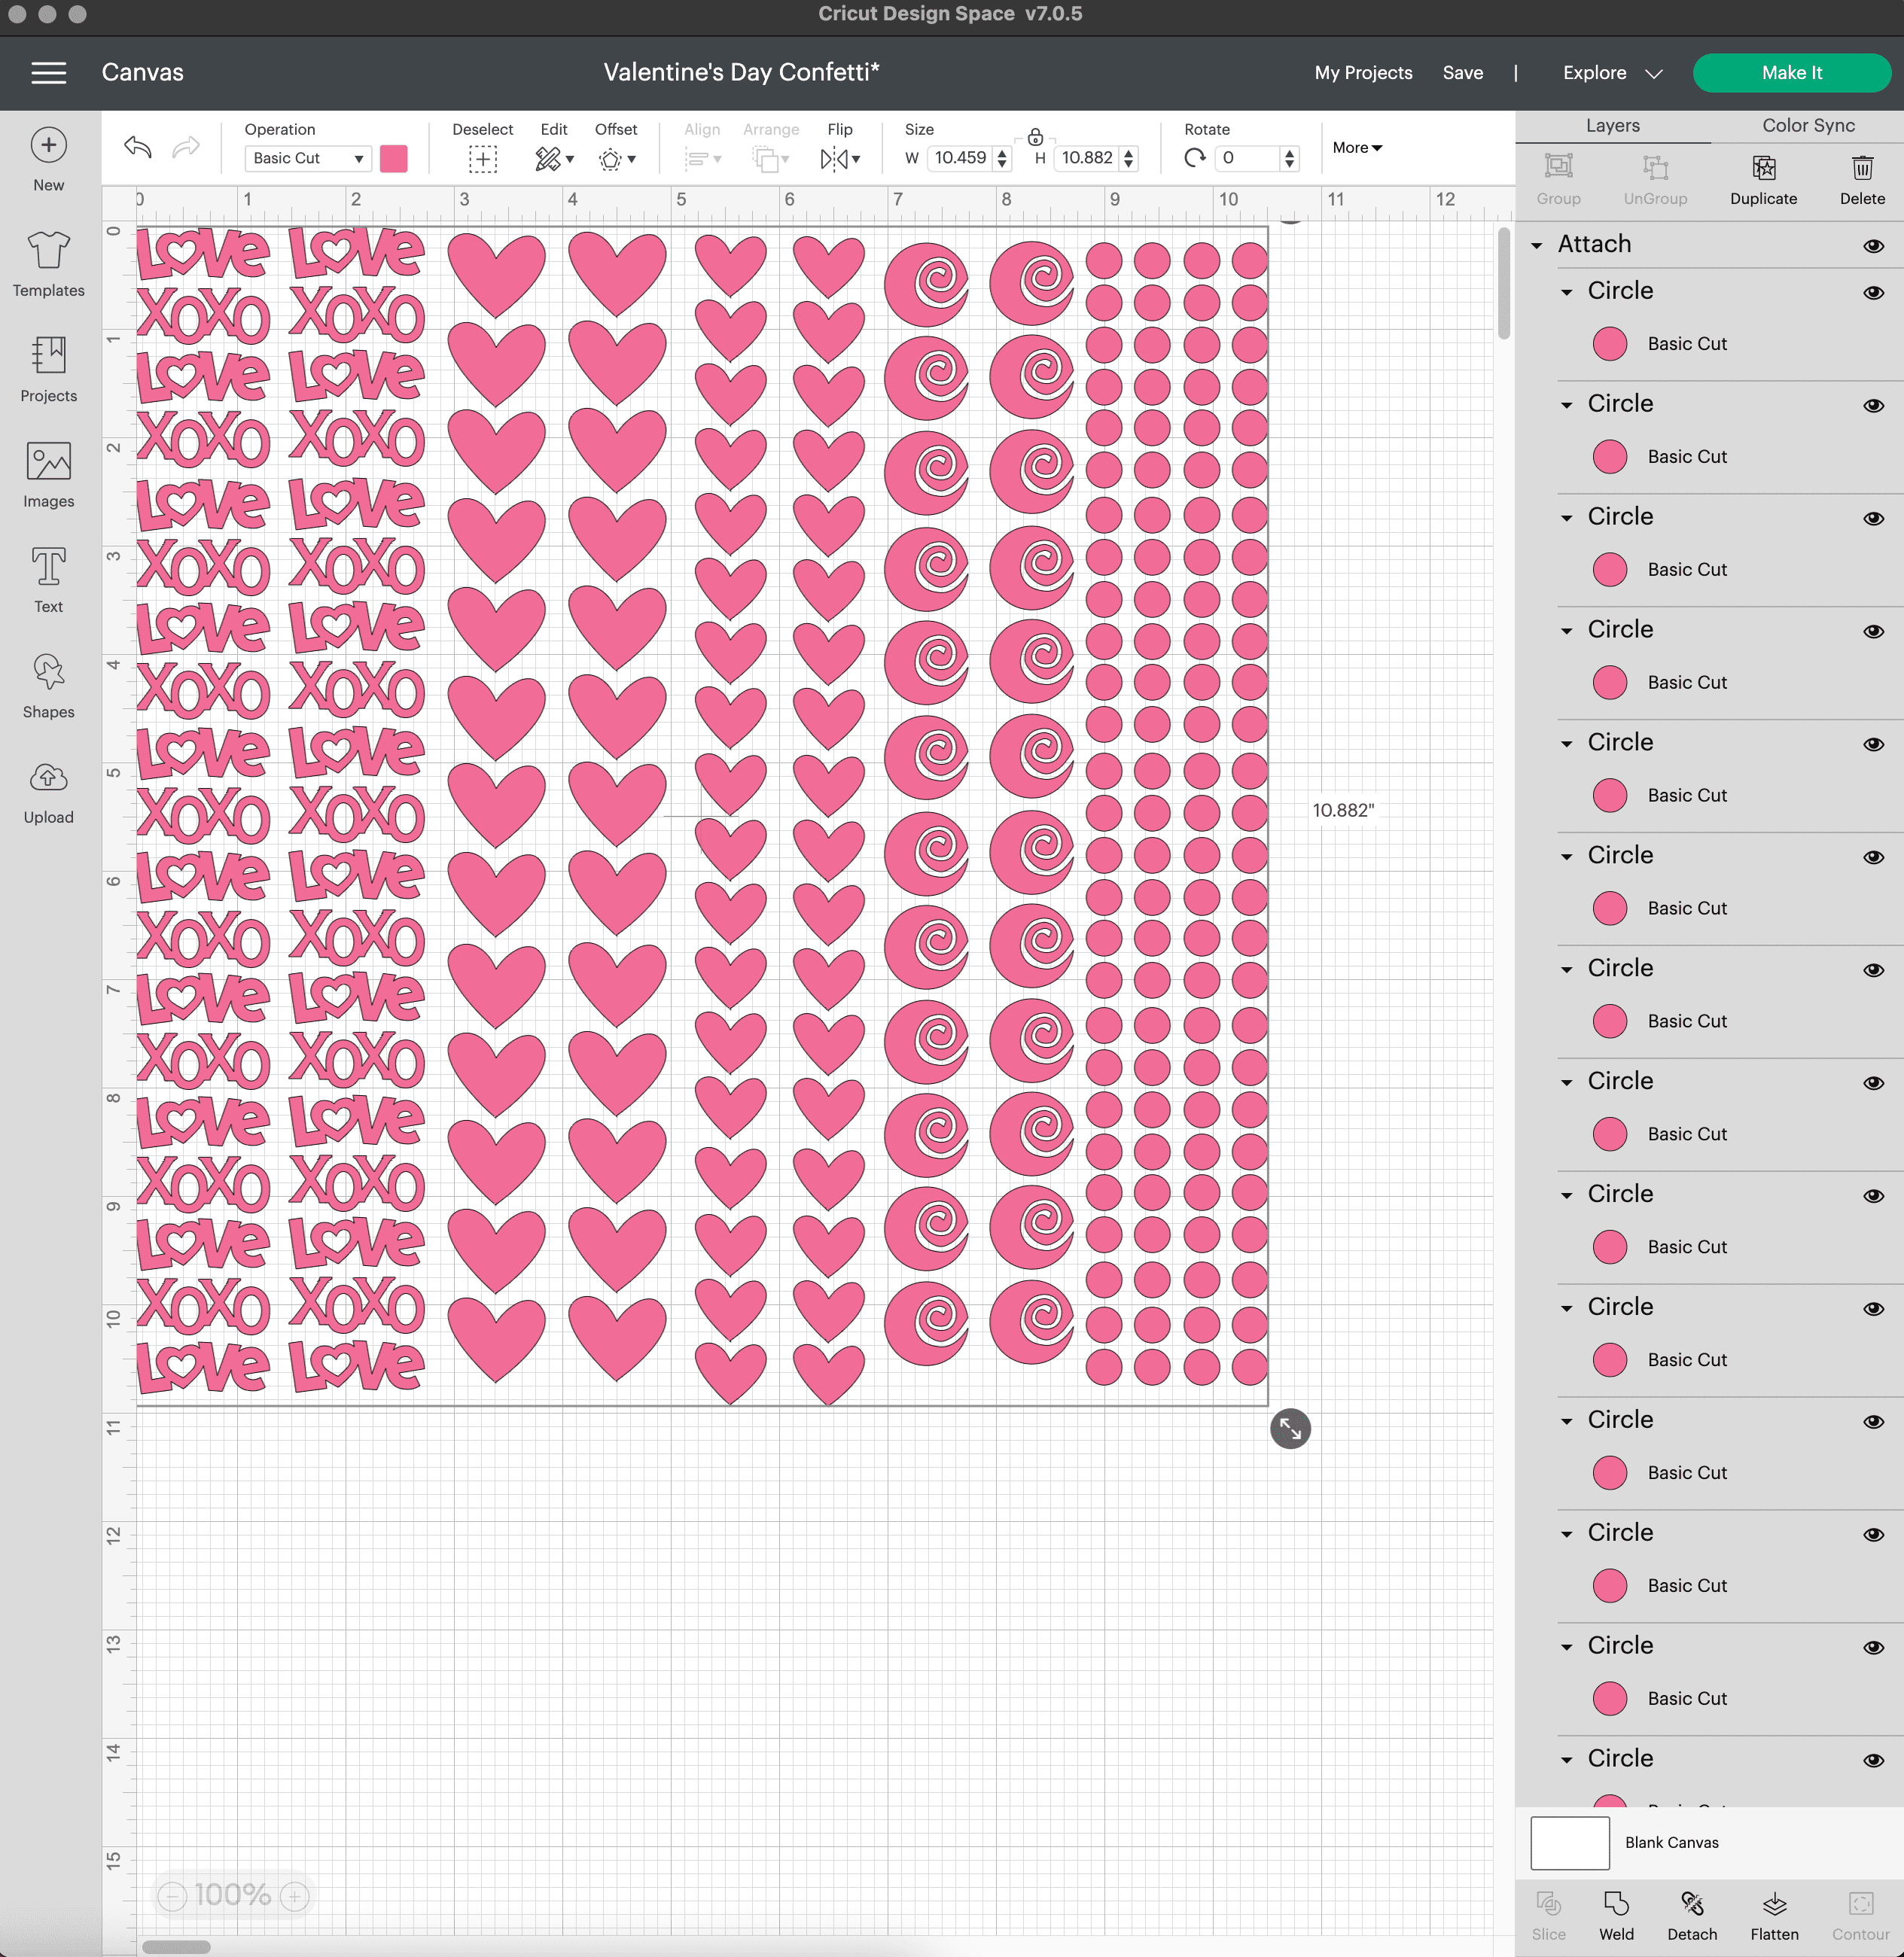 screenshot of the confetti shapes laid out in Cricut's Design Space